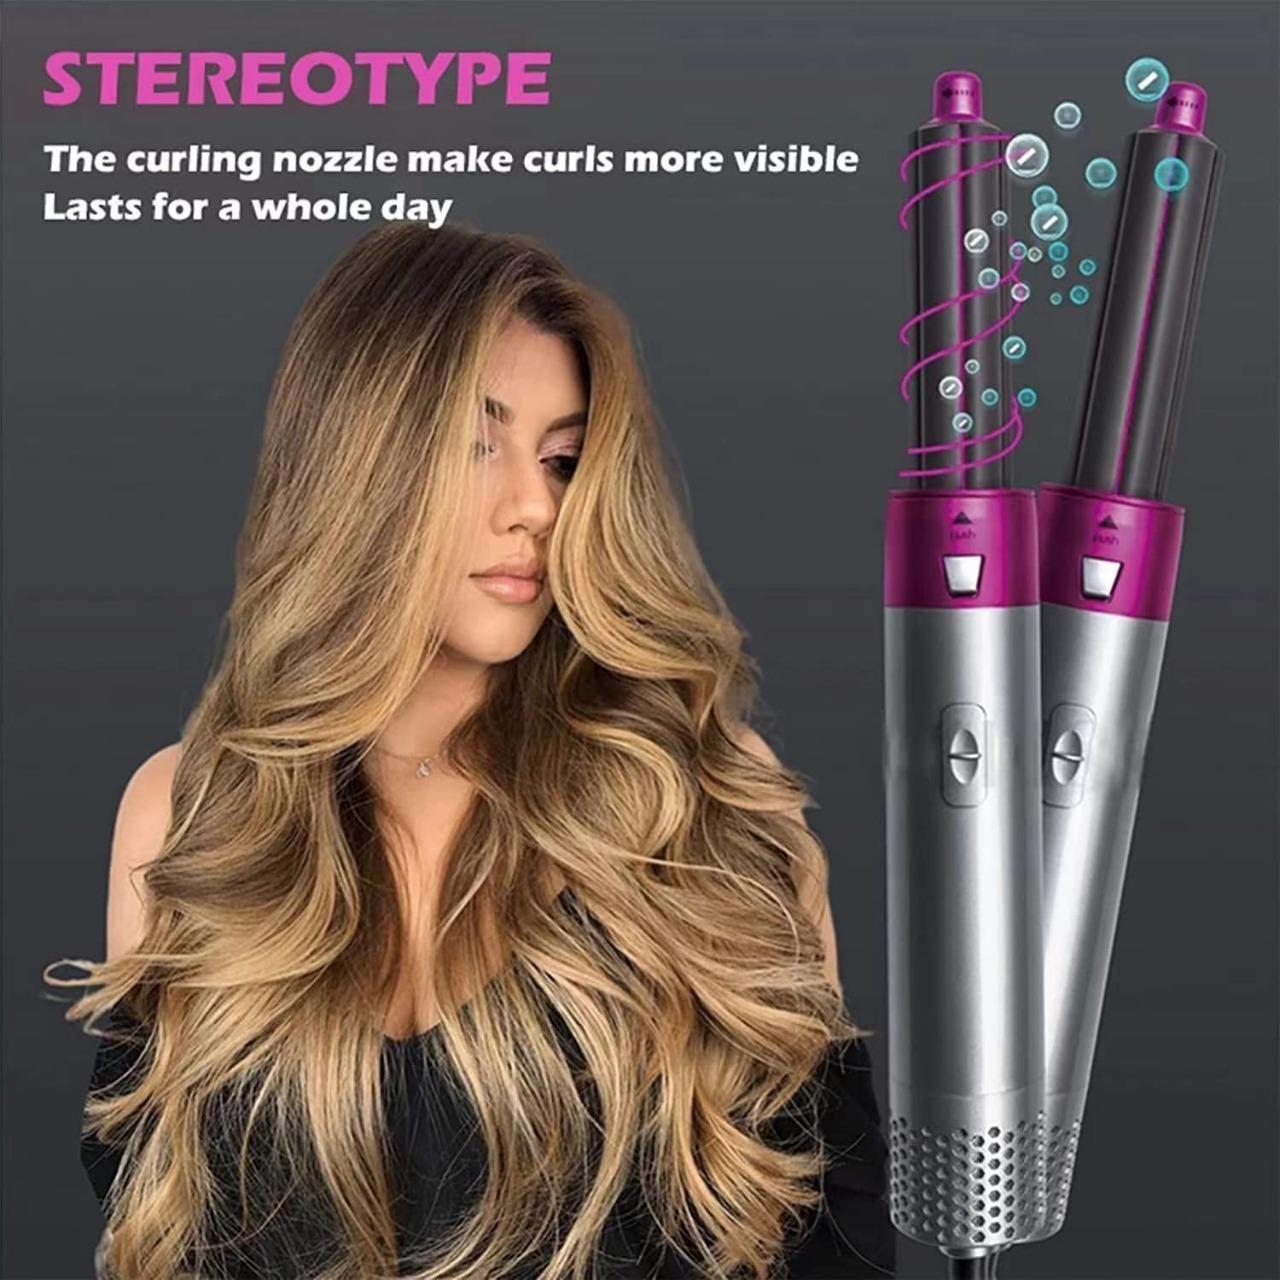 Transform Your Hair Styling Game with the 5-in-1 Hair Curler, Straightener, Dryer, and Hot Hair Comb